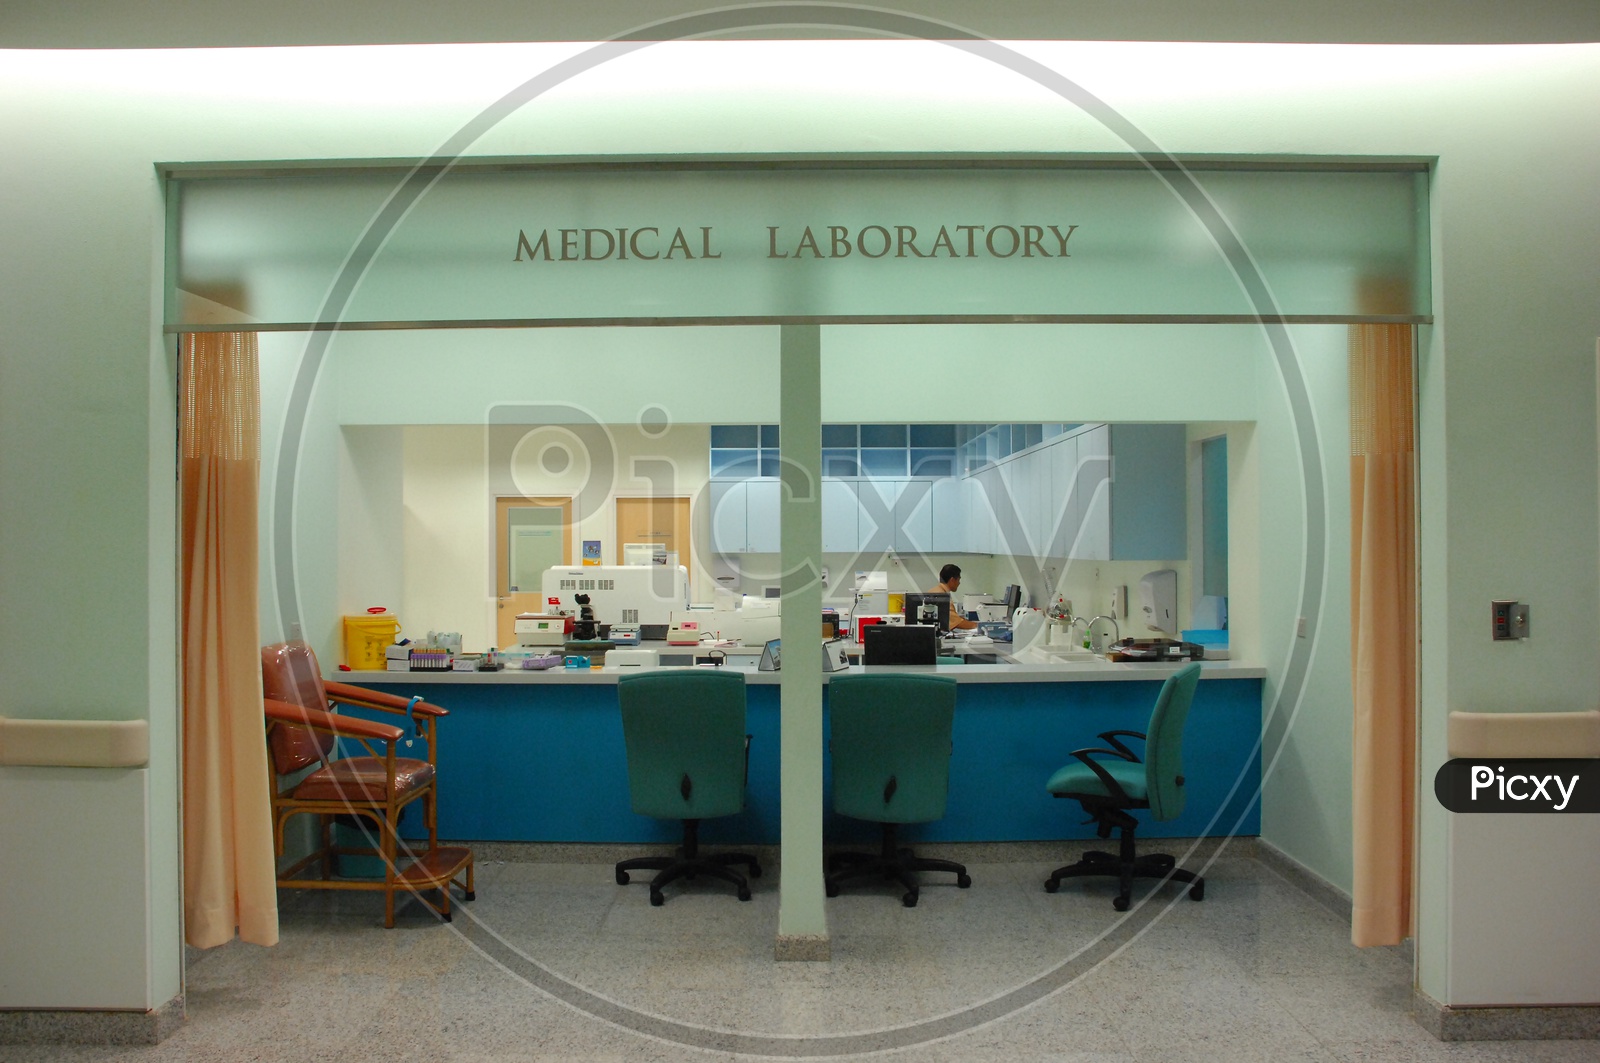 Medical Laboratory in a Hospital